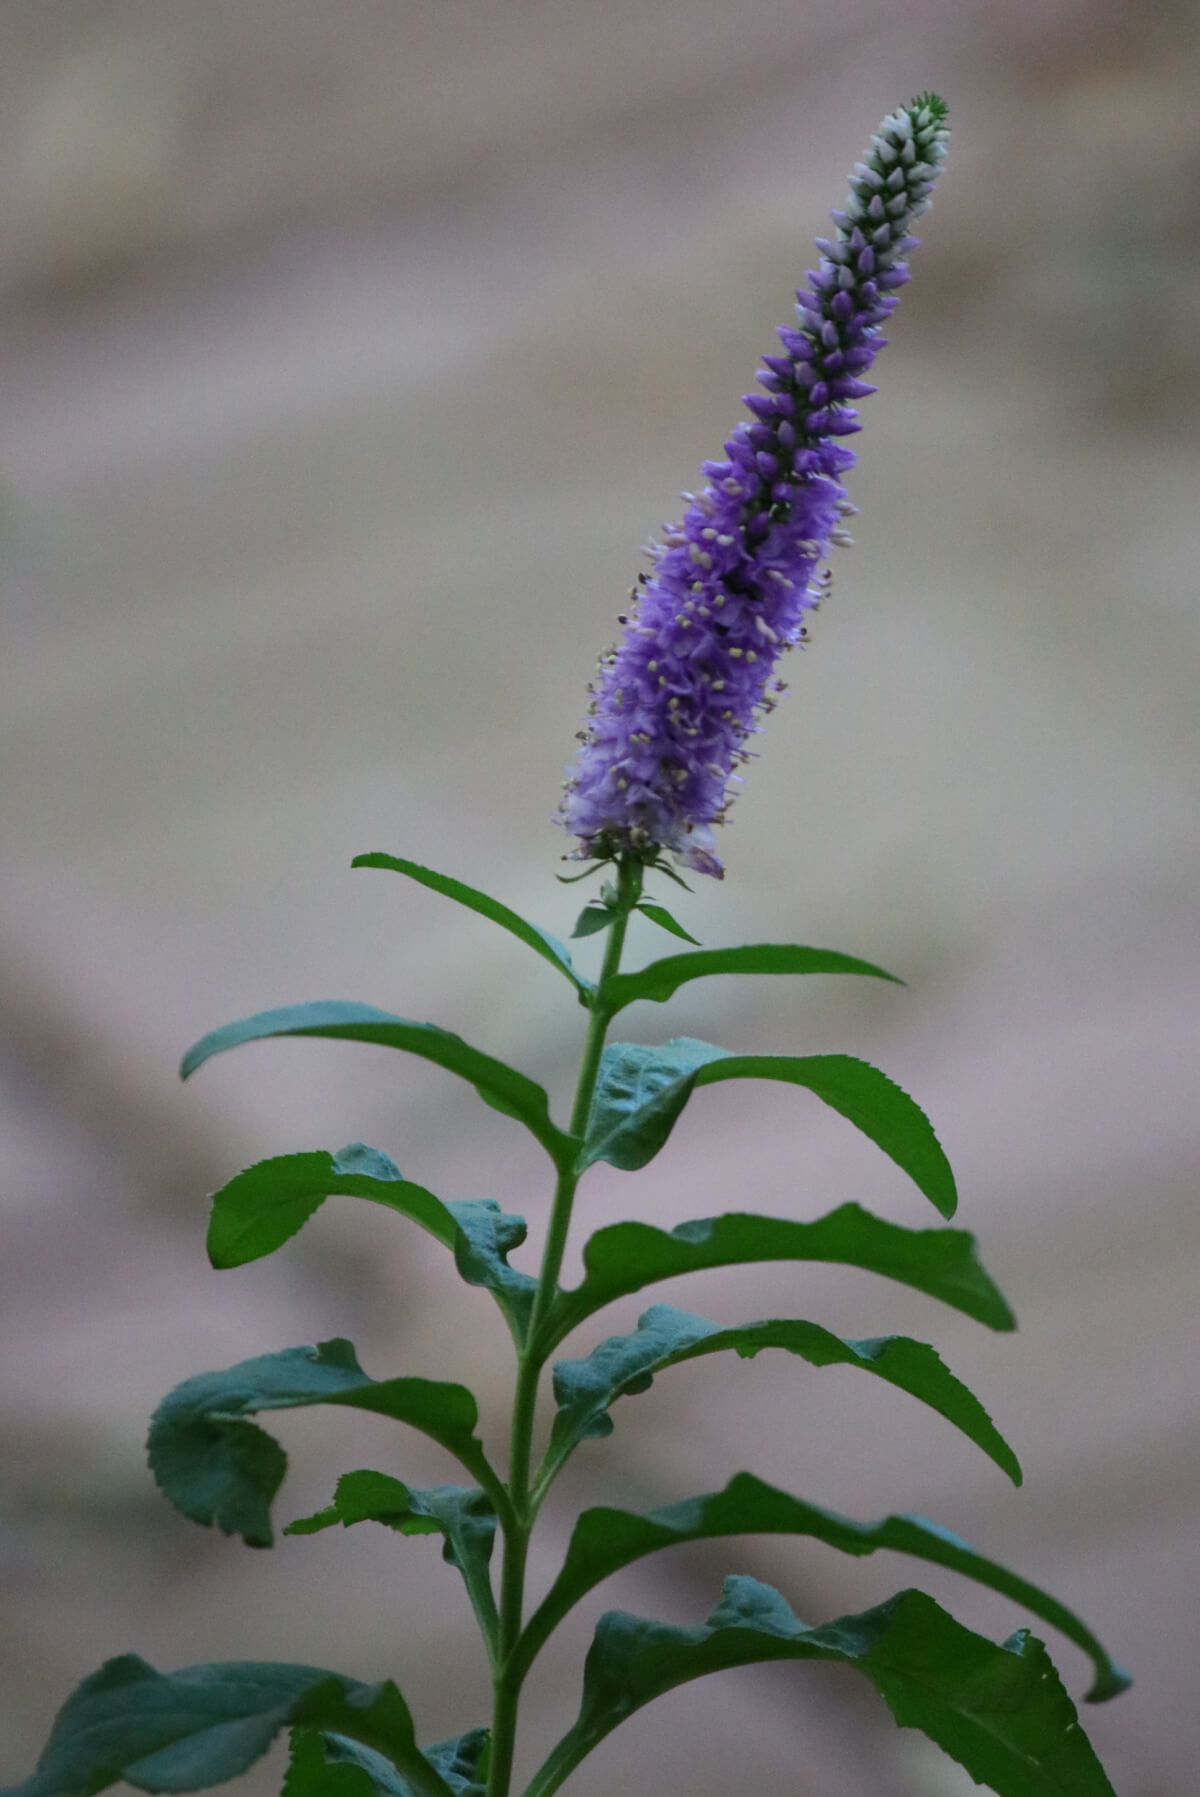 Veronica with a purple bloom